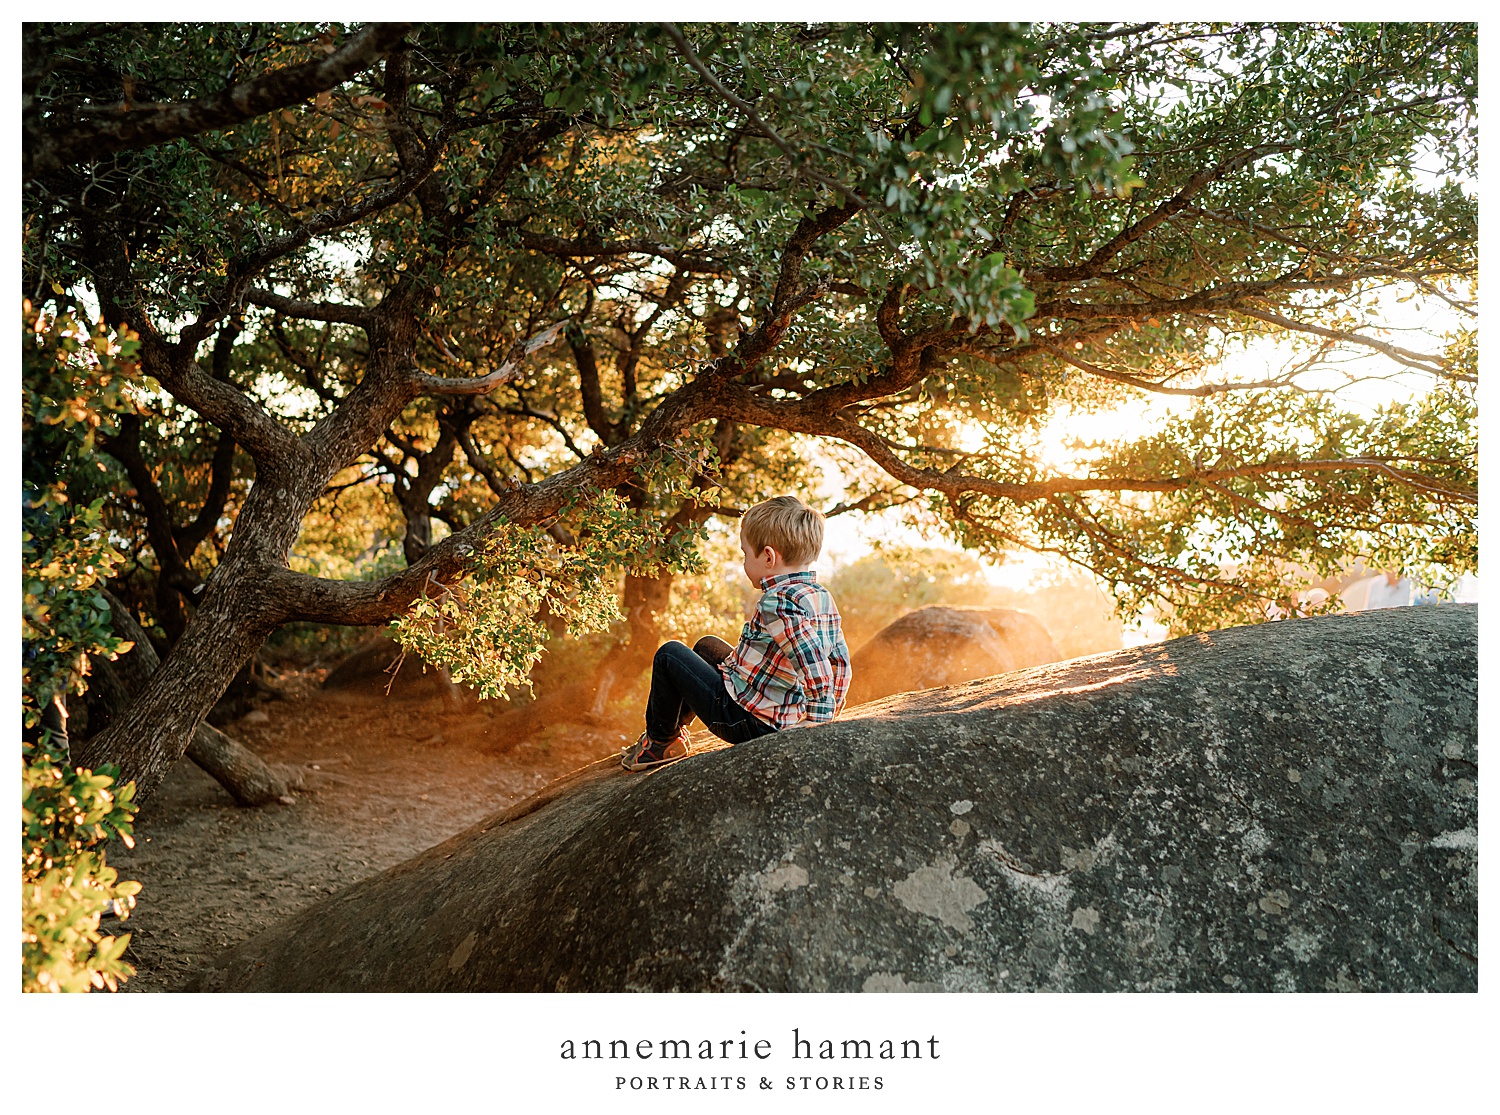  AnneMarie Hamant uses dramatic lighting to create  family photography that her clients treasure forever.  